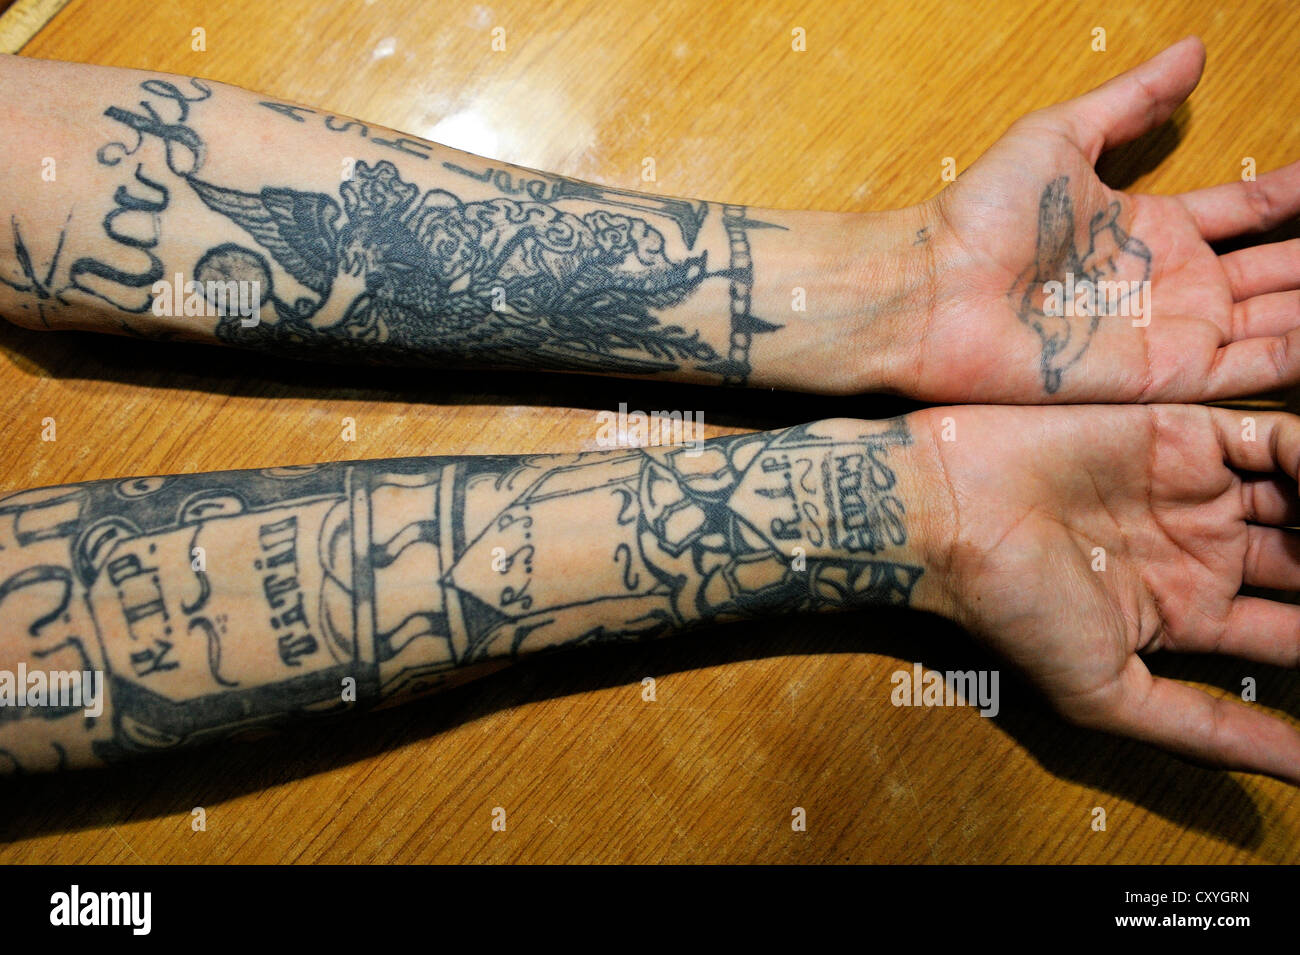 6763 Forearm Tattoo Man Images Stock Photos  Vectors  Shutterstock